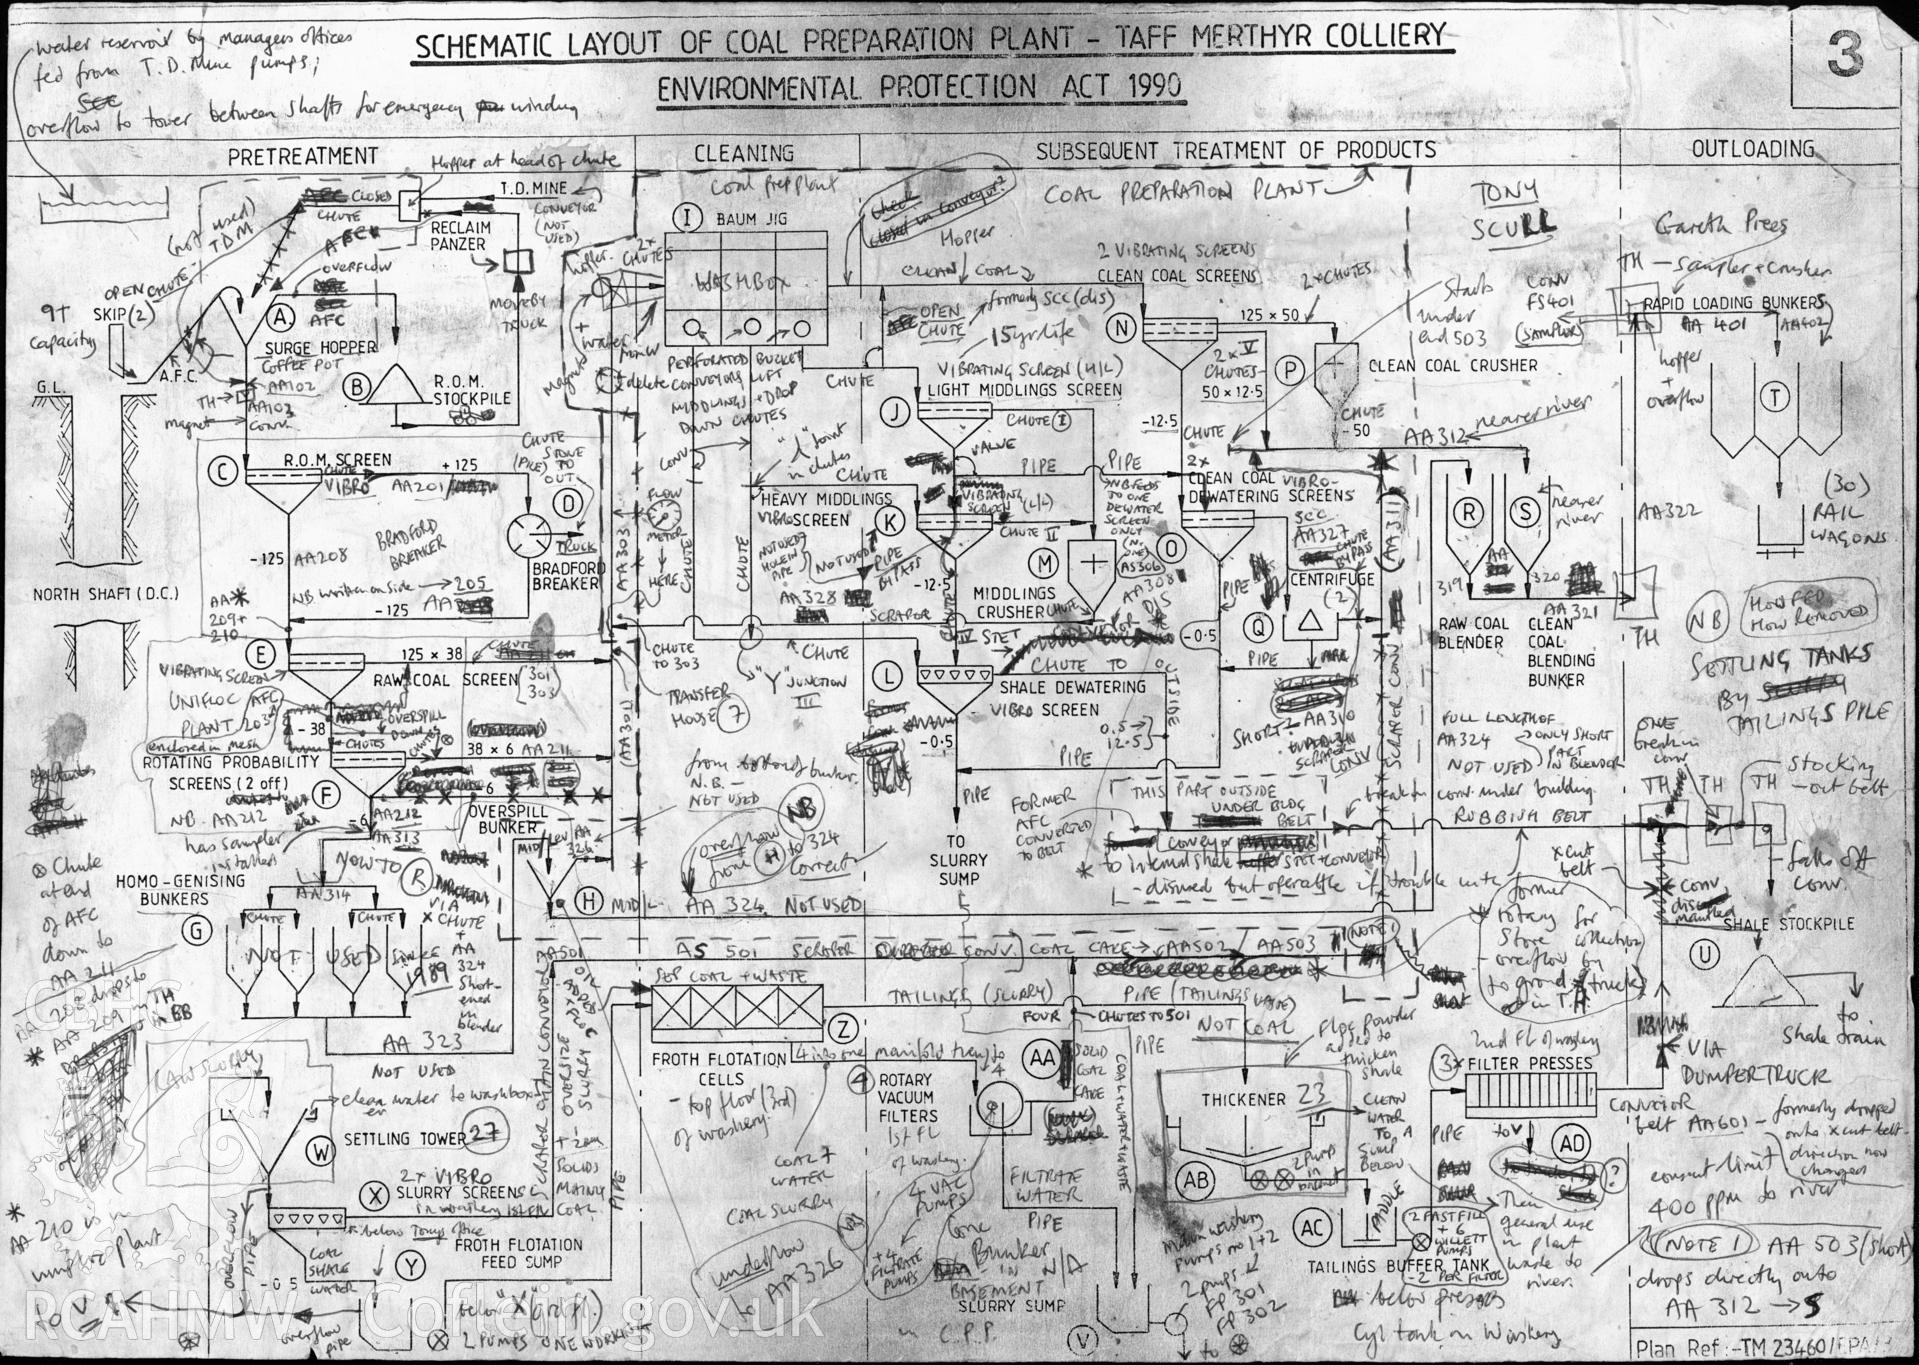 Detailed schematic layout of the coal preparation process at Taff Merthyr Colliery with annotations by Brian Malaws.